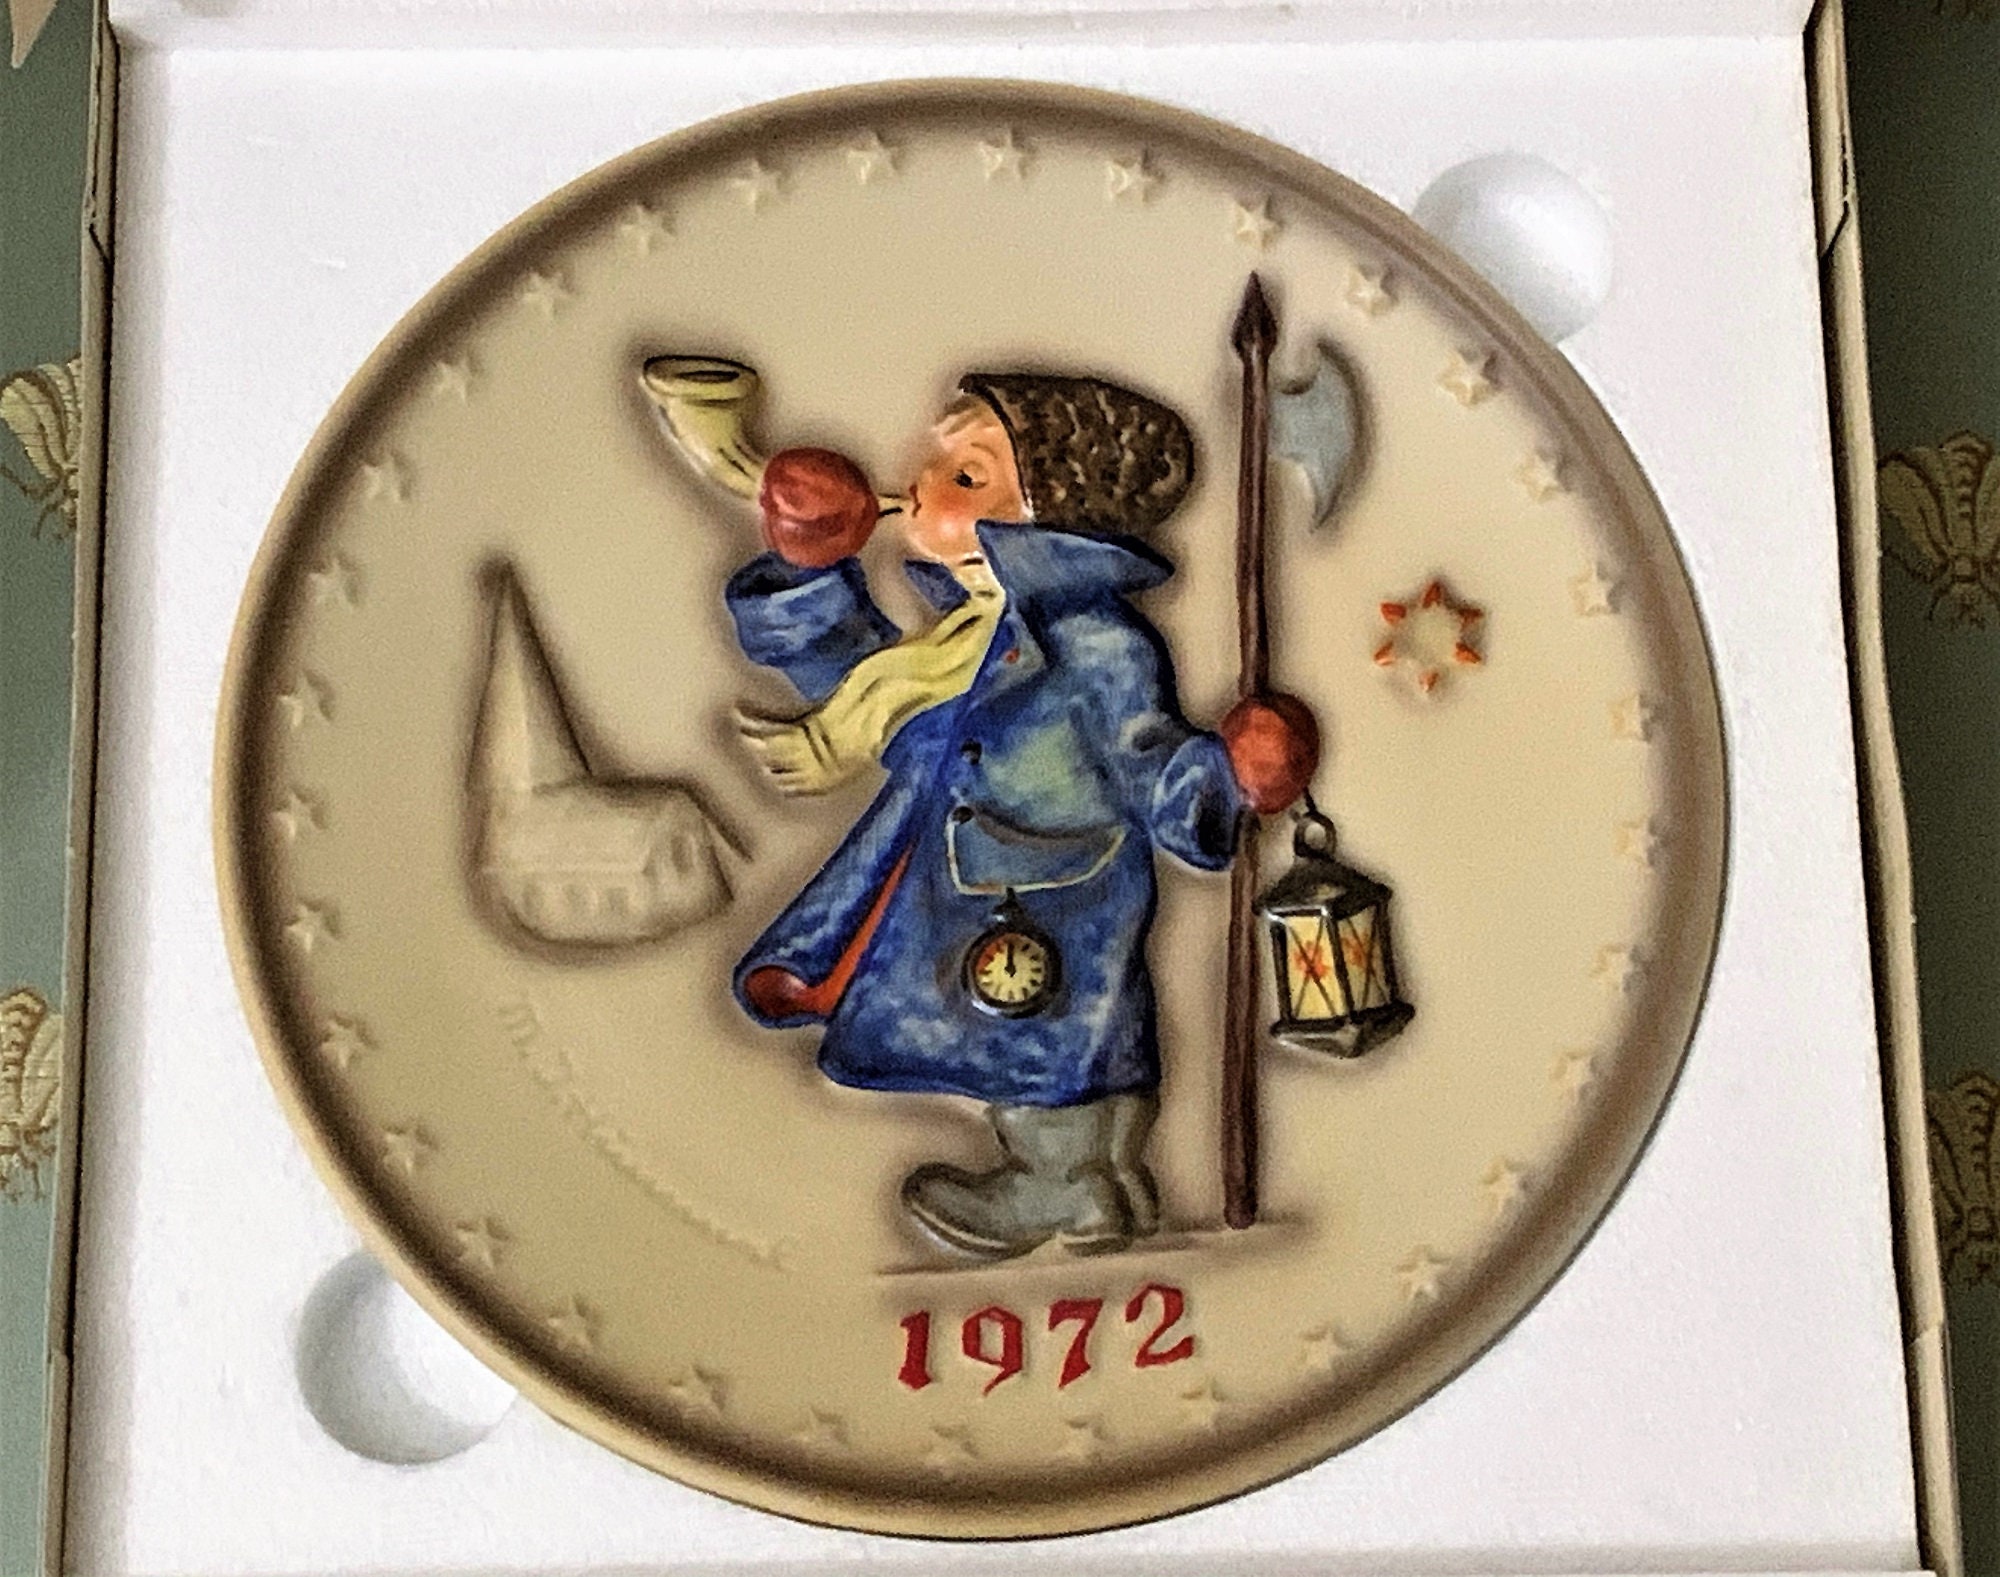 Vintage Collectible Hummel Annual Plate Year 1972, 3 Dimension Scene Night Watcher, - West Germany. 7.5, Mint in Original Box